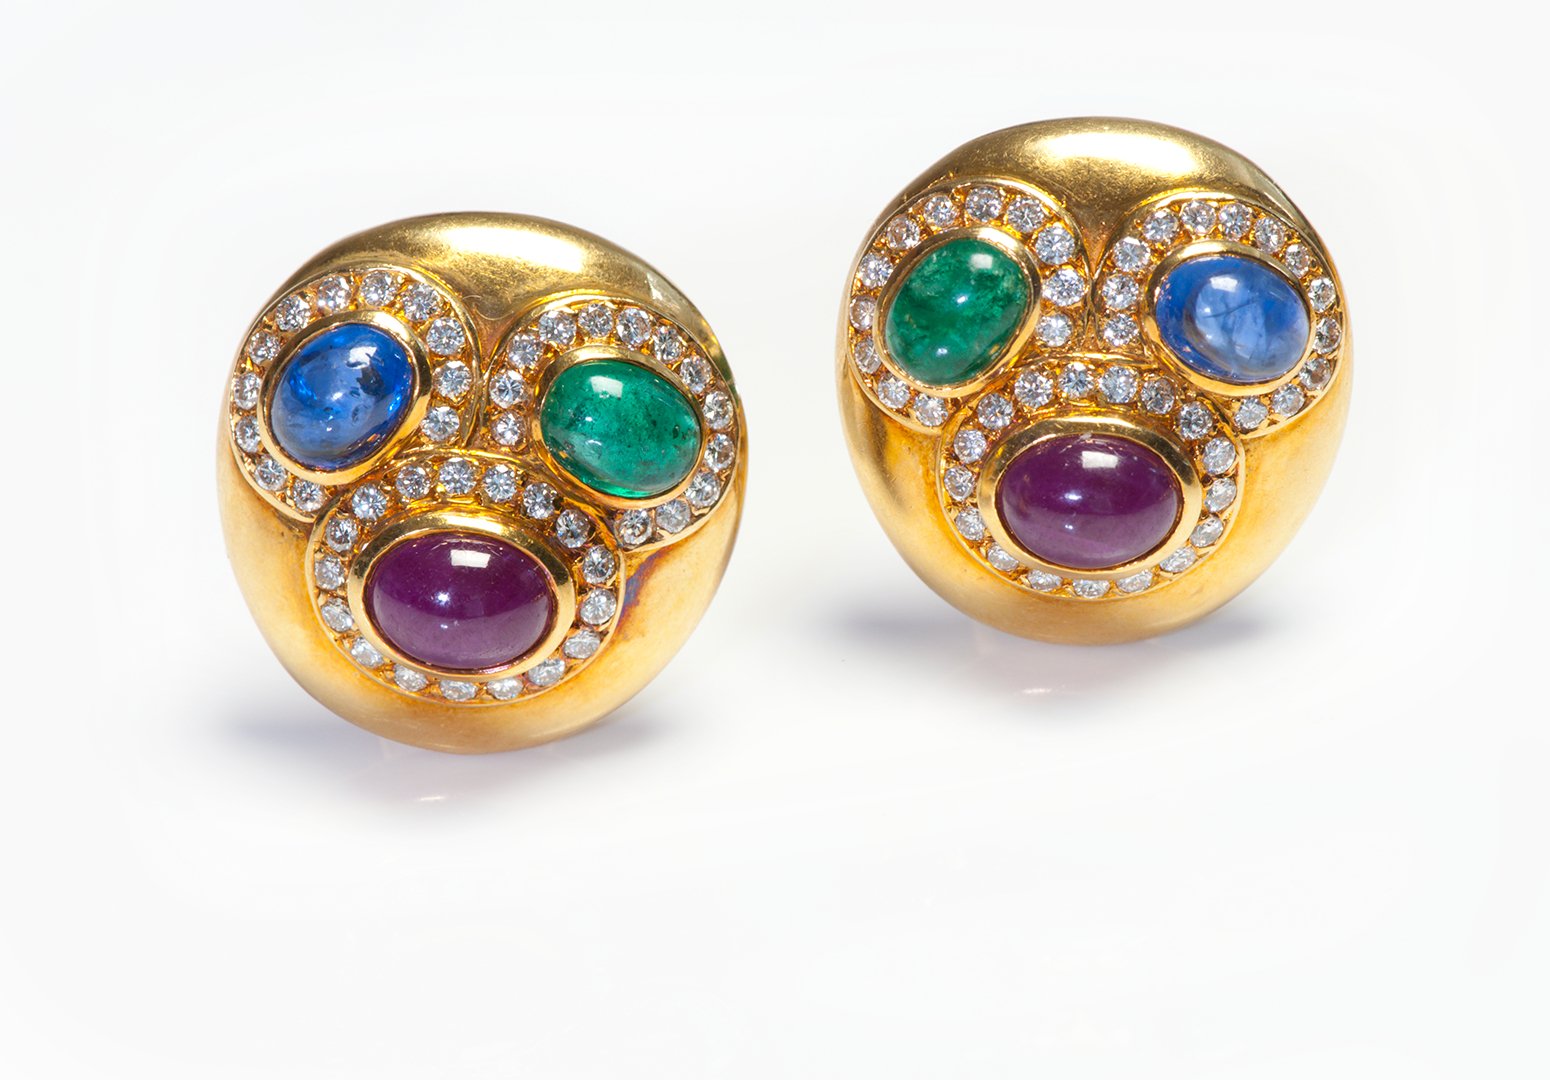 Cabochon Emerald Ruby Sapphire Diamond Gold Earrings - DSF Antique Jewelry